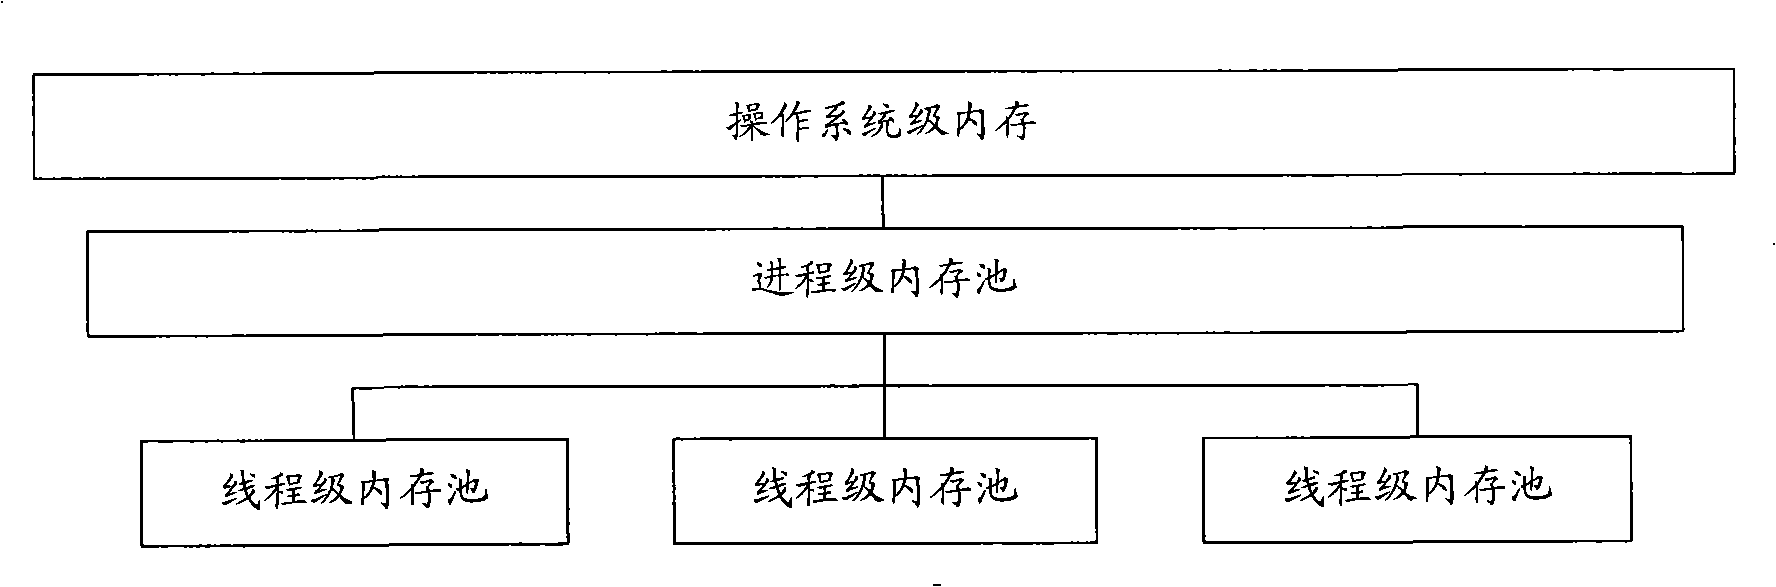 Internal memory operation management method and system